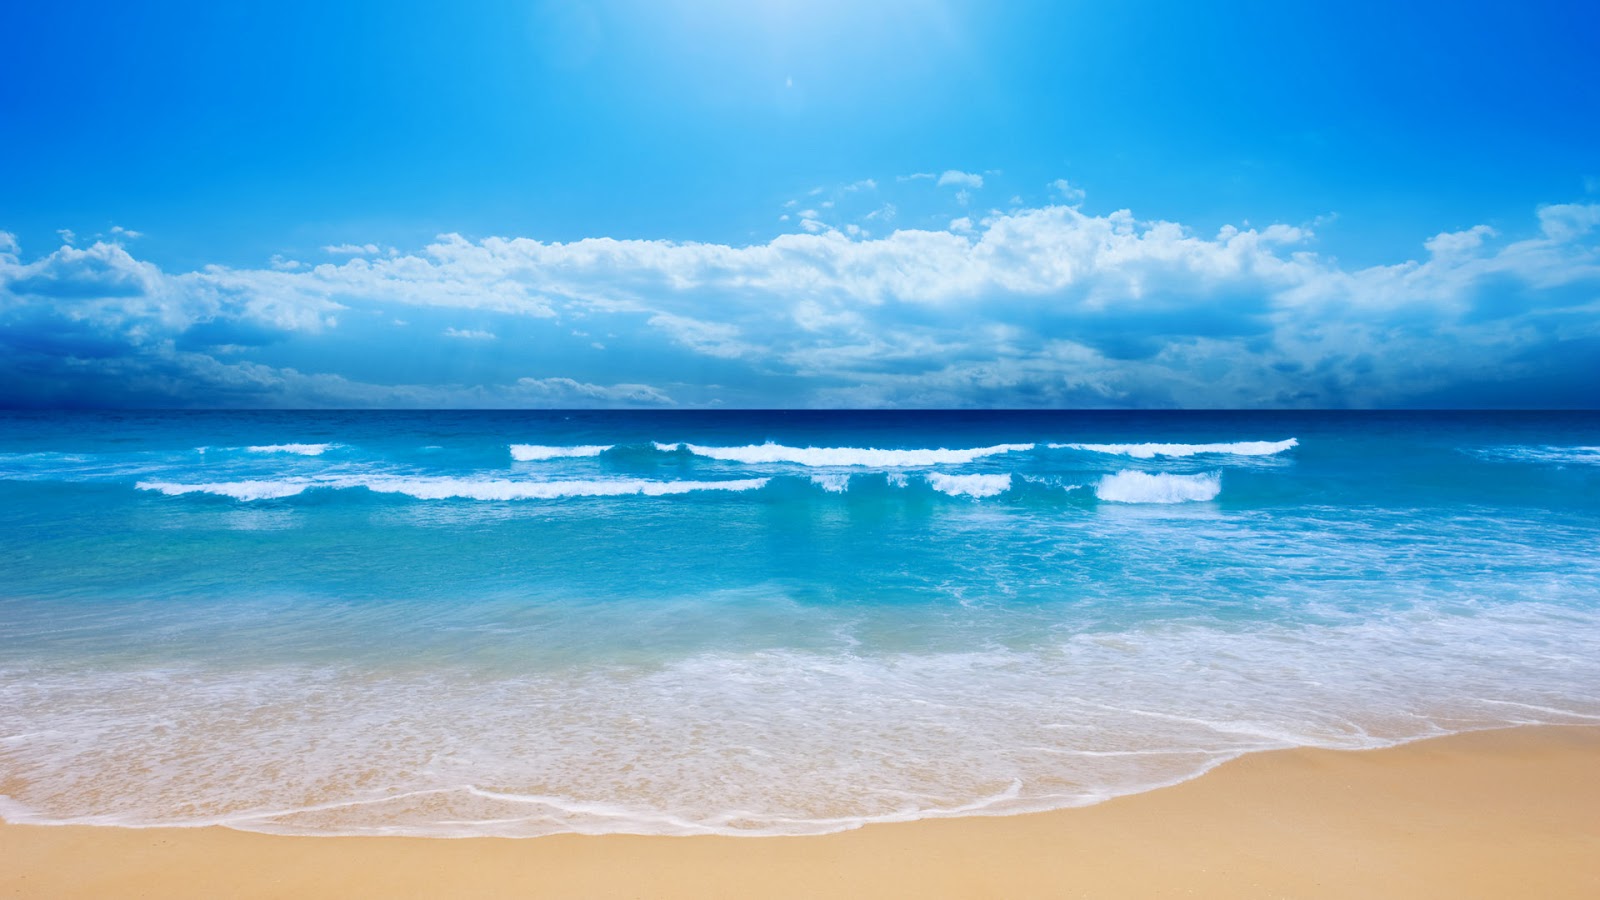 Enjoy and relaxing Ocean Waves Wallpaper s Powerful big waves in the